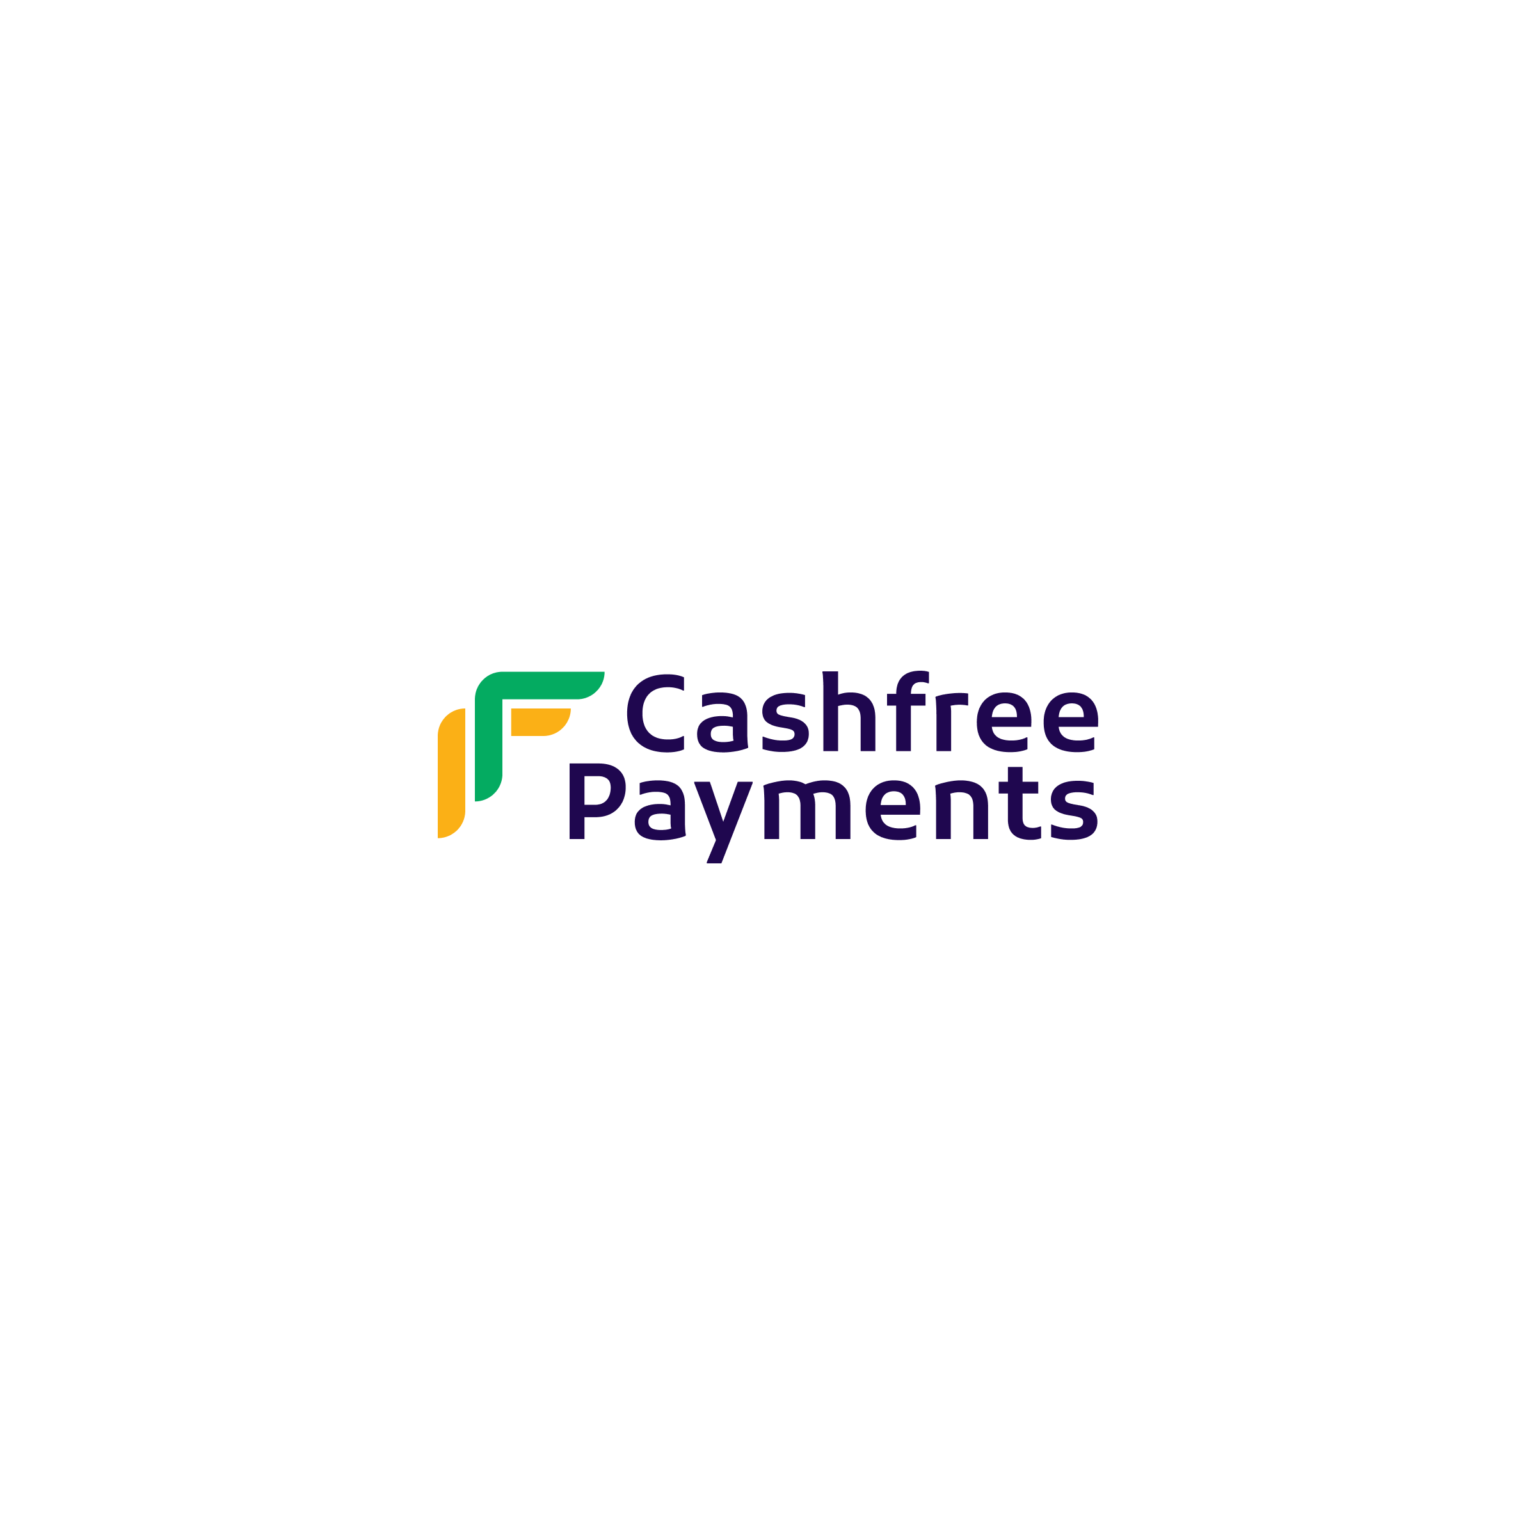 cashfree-ties-up-with-dvara-solutions-to-provide-digital-disbursement-and-collection-services